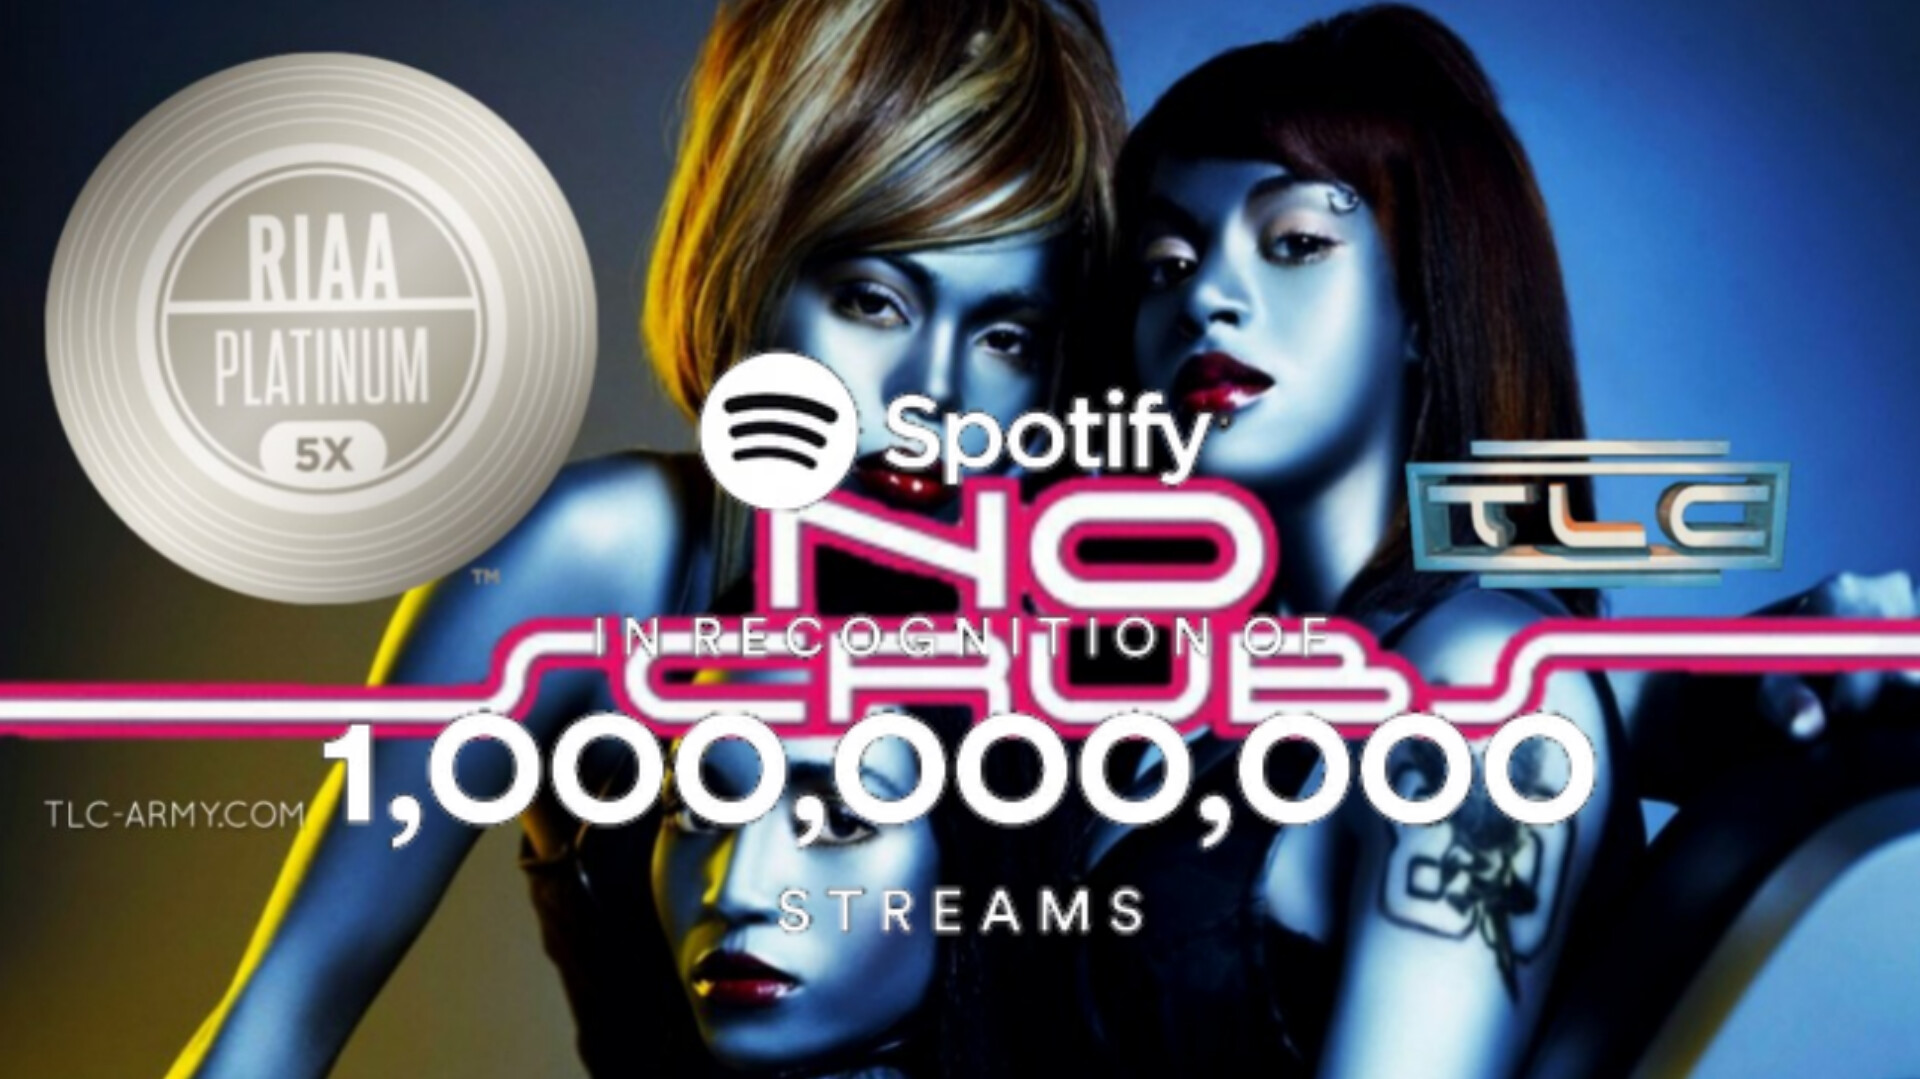 TLC’s ‘No Scrubs’ Becomes Their First Song To Reach 1 Billion Streams on Spotify